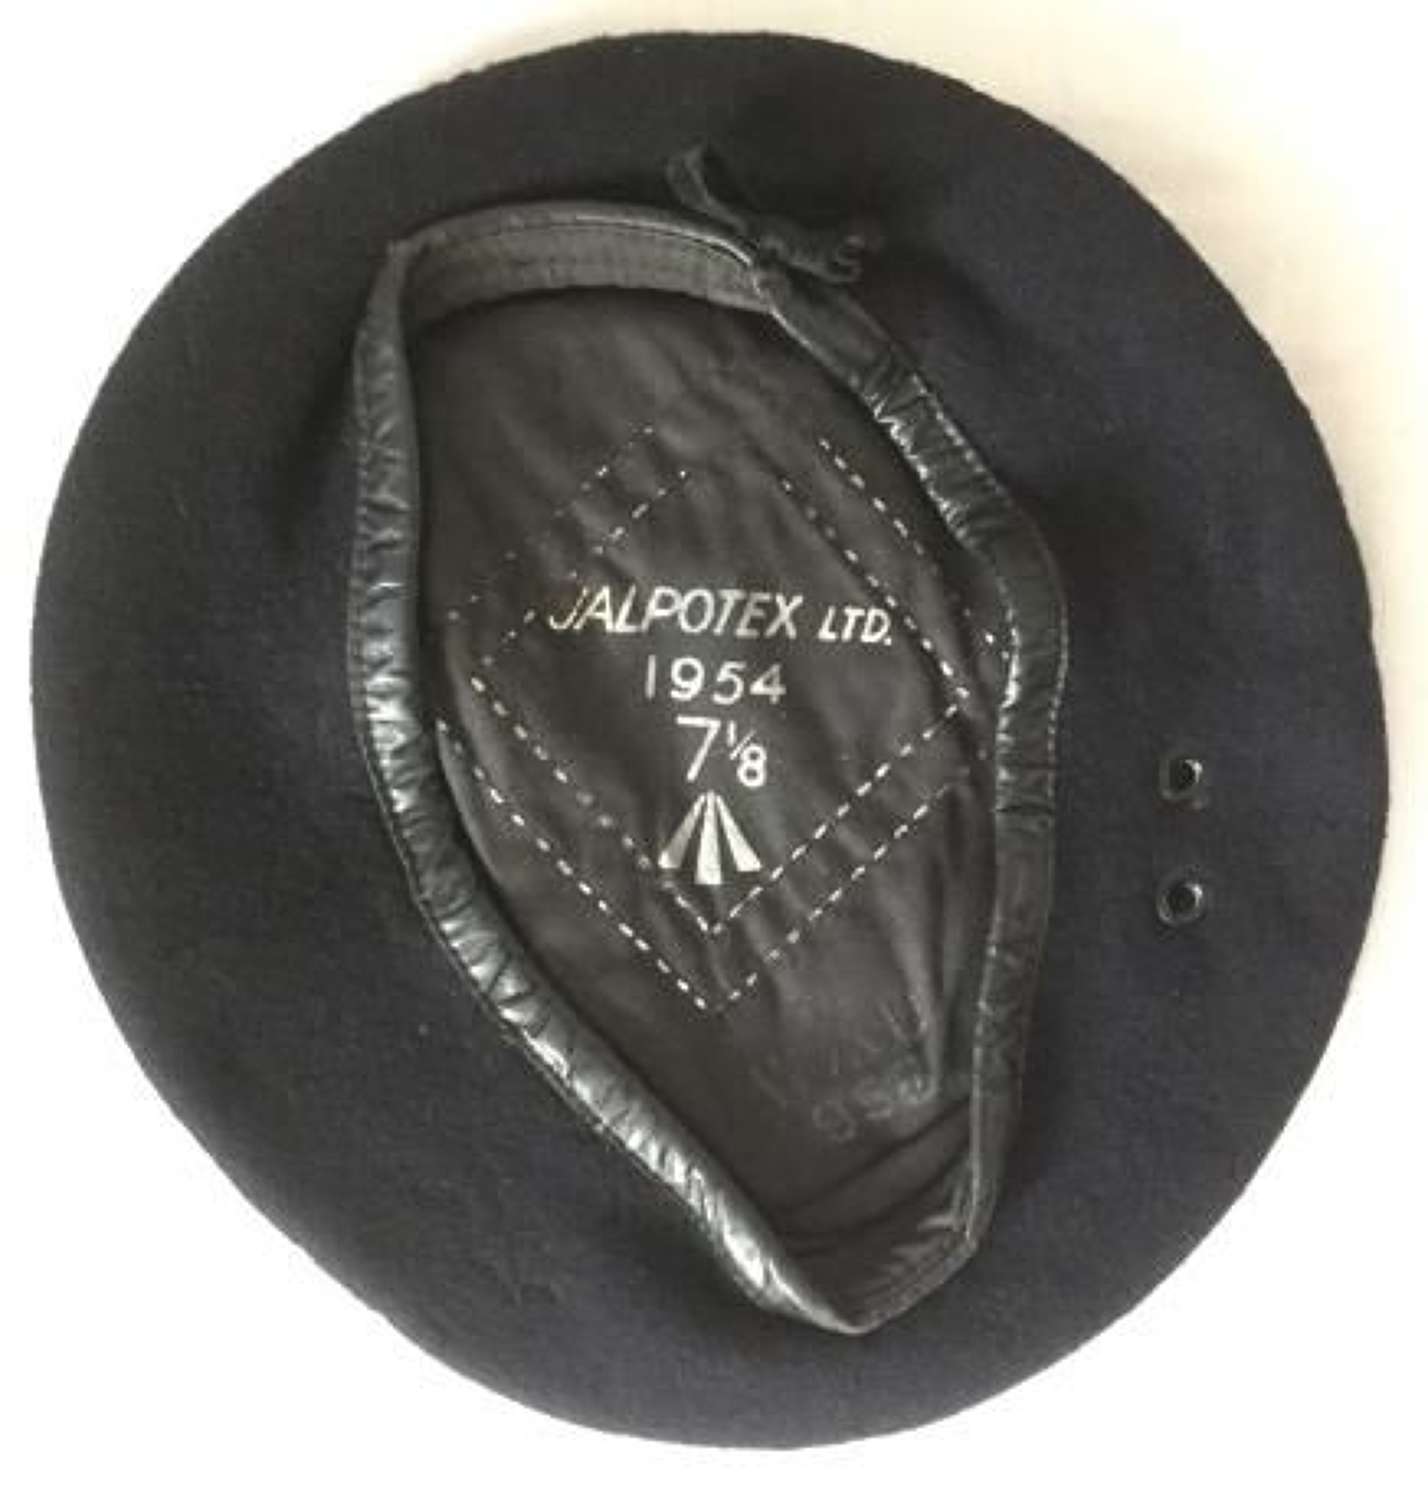 1954 Dated British Army Beret by 'Jalpotex LTD' - Size 7 1/8